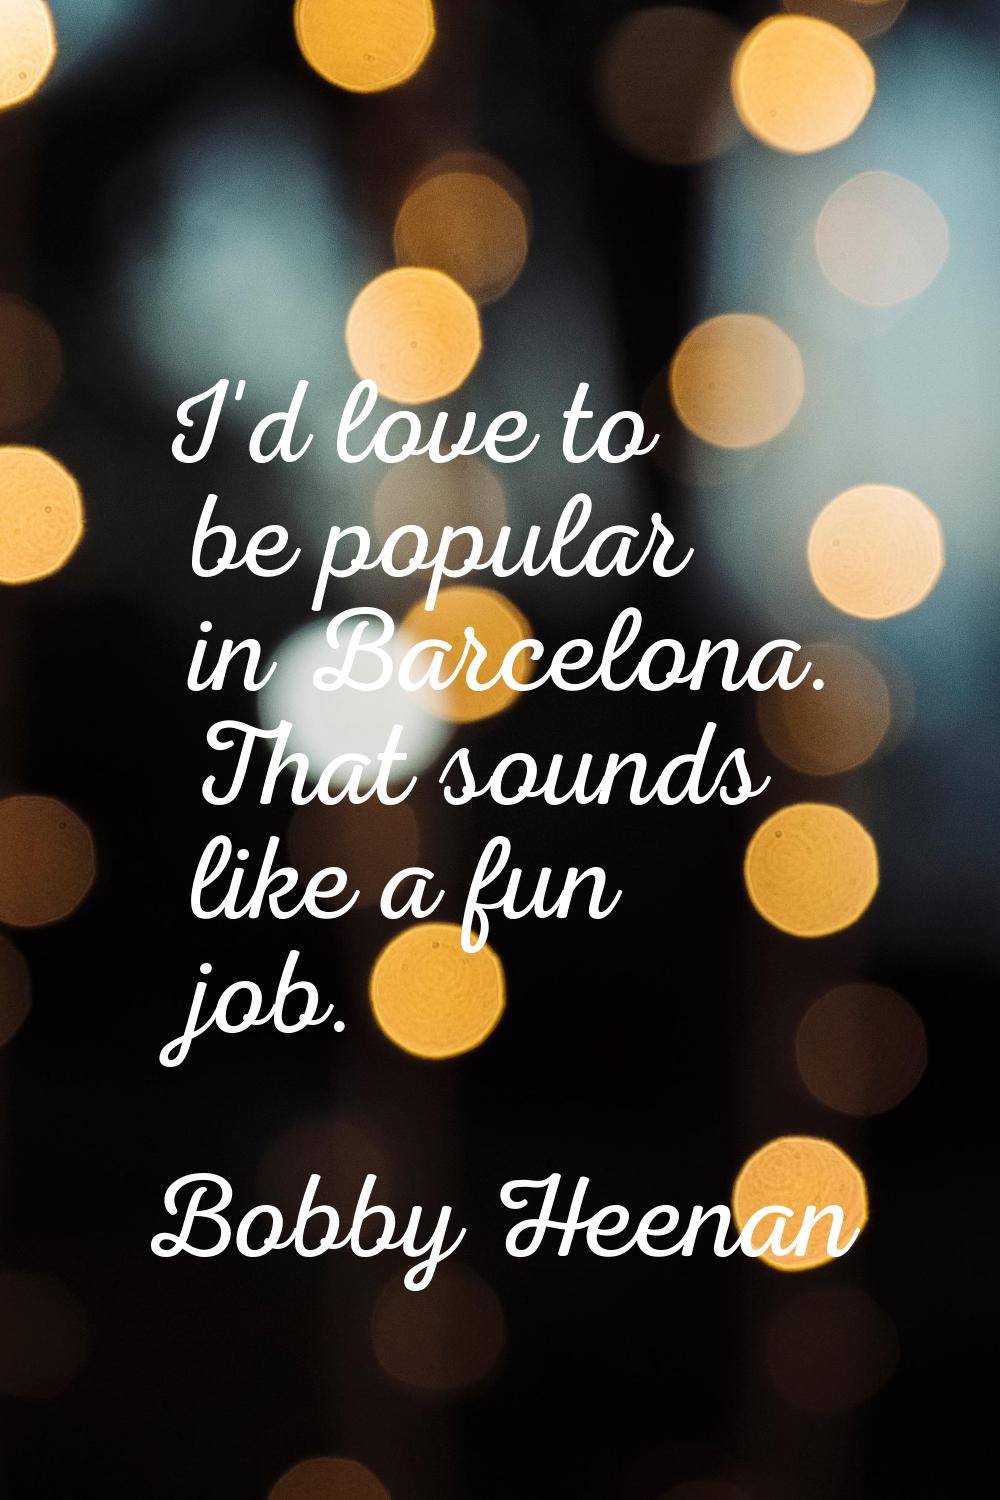 I'd love to be popular in Barcelona. That sounds like a fun job.